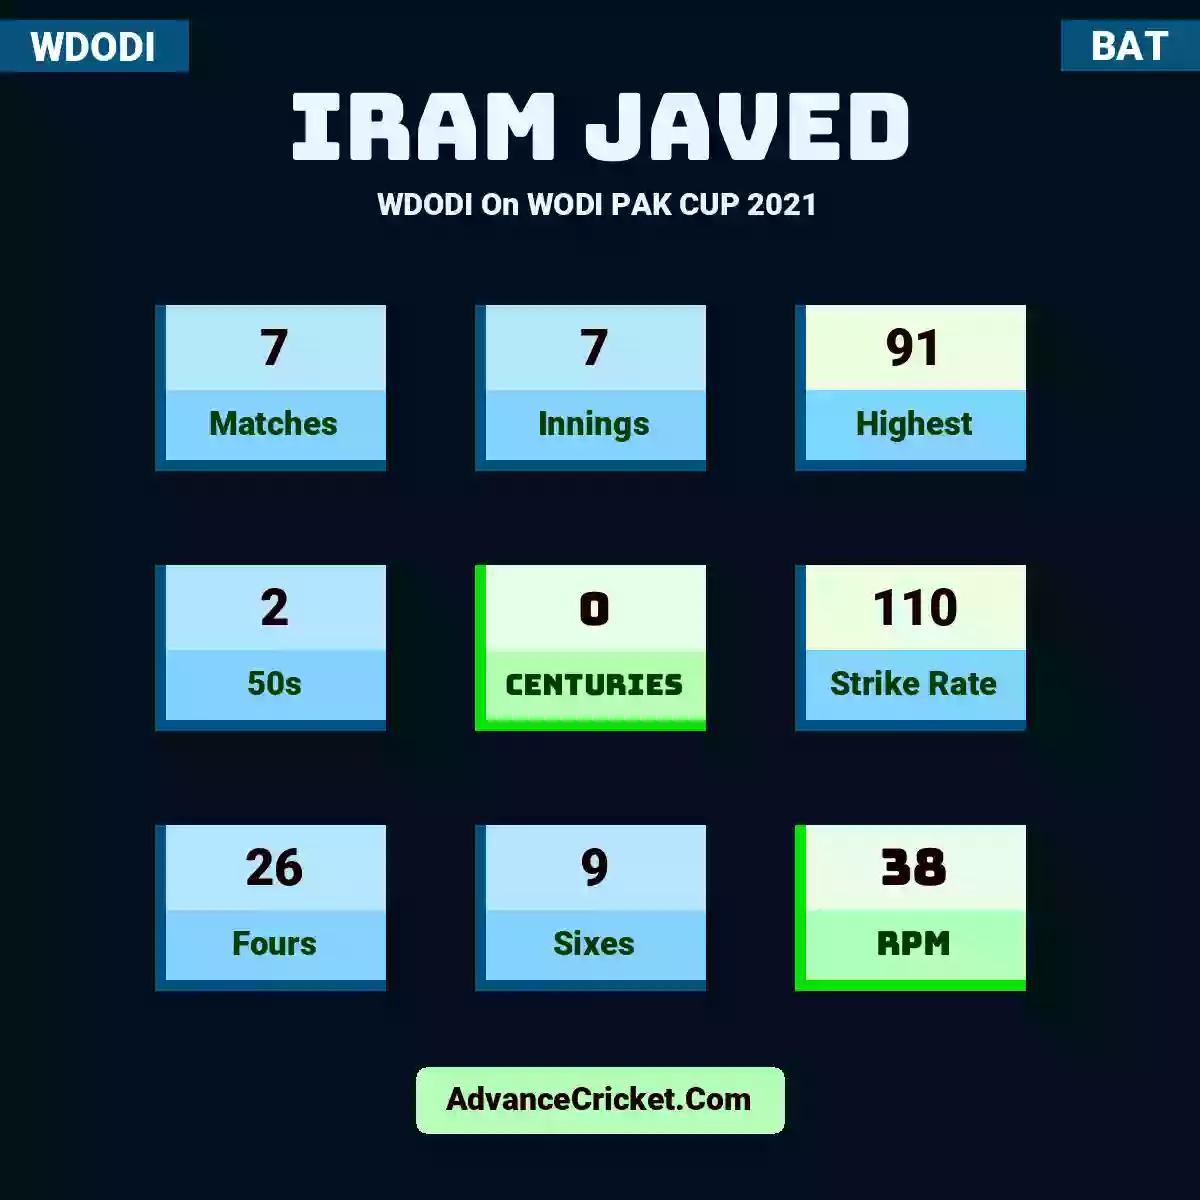 Iram Javed WDODI  On WODI PAK CUP 2021, Iram Javed played 7 matches, scored 91 runs as highest, 2 half-centuries, and 0 centuries, with a strike rate of 110. I.Javed hit 26 fours and 9 sixes, with an RPM of 38.